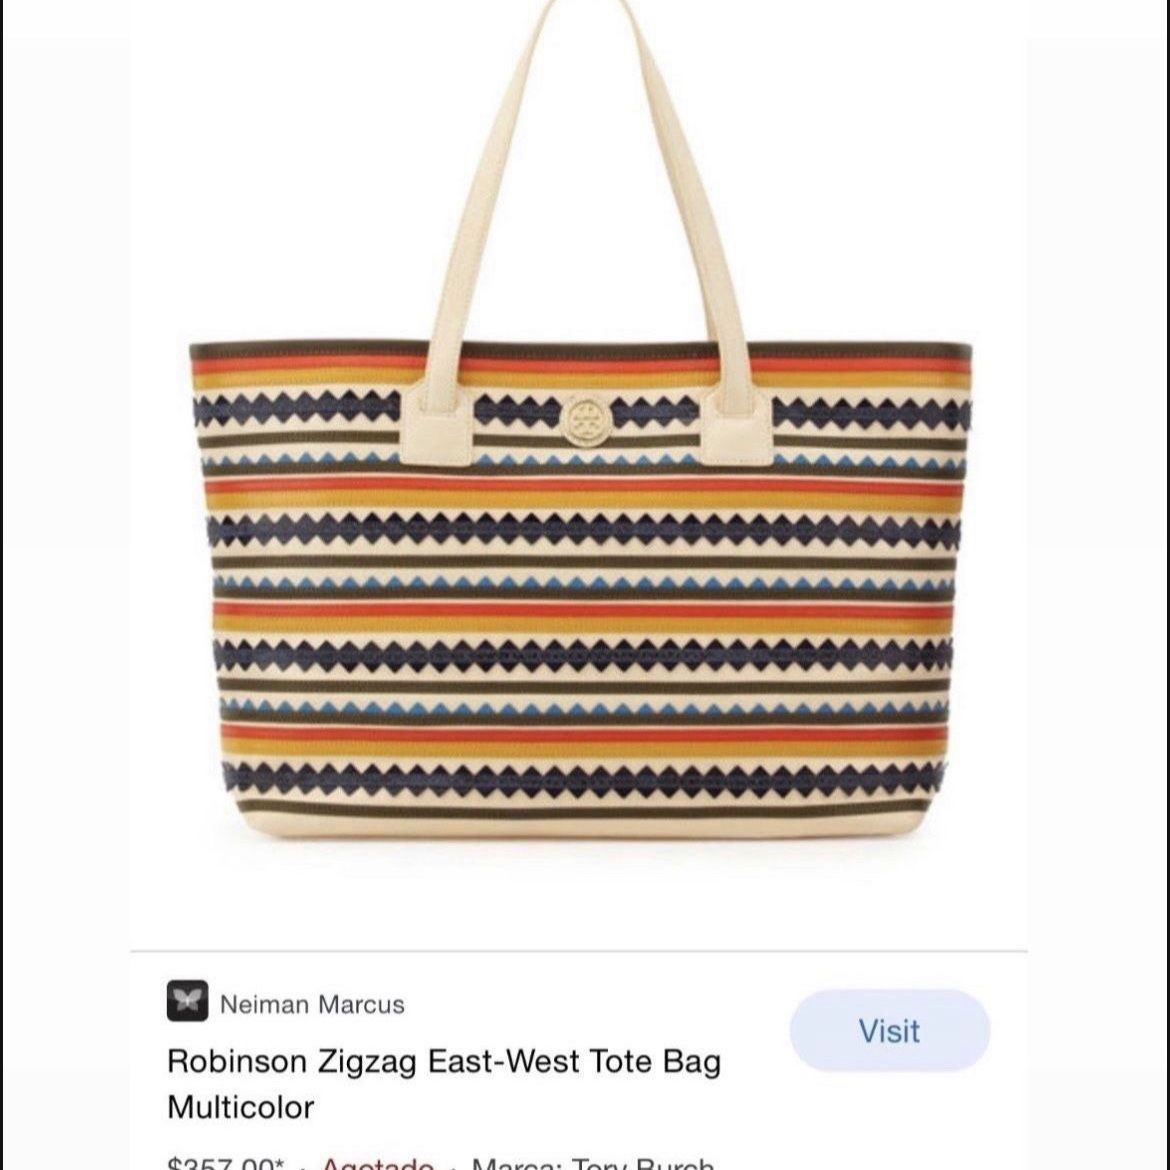 TORY BURCH Robinson Zigzag East-West Tote Bag Multicolor for Sale in Miami  Beach, FL - OfferUp